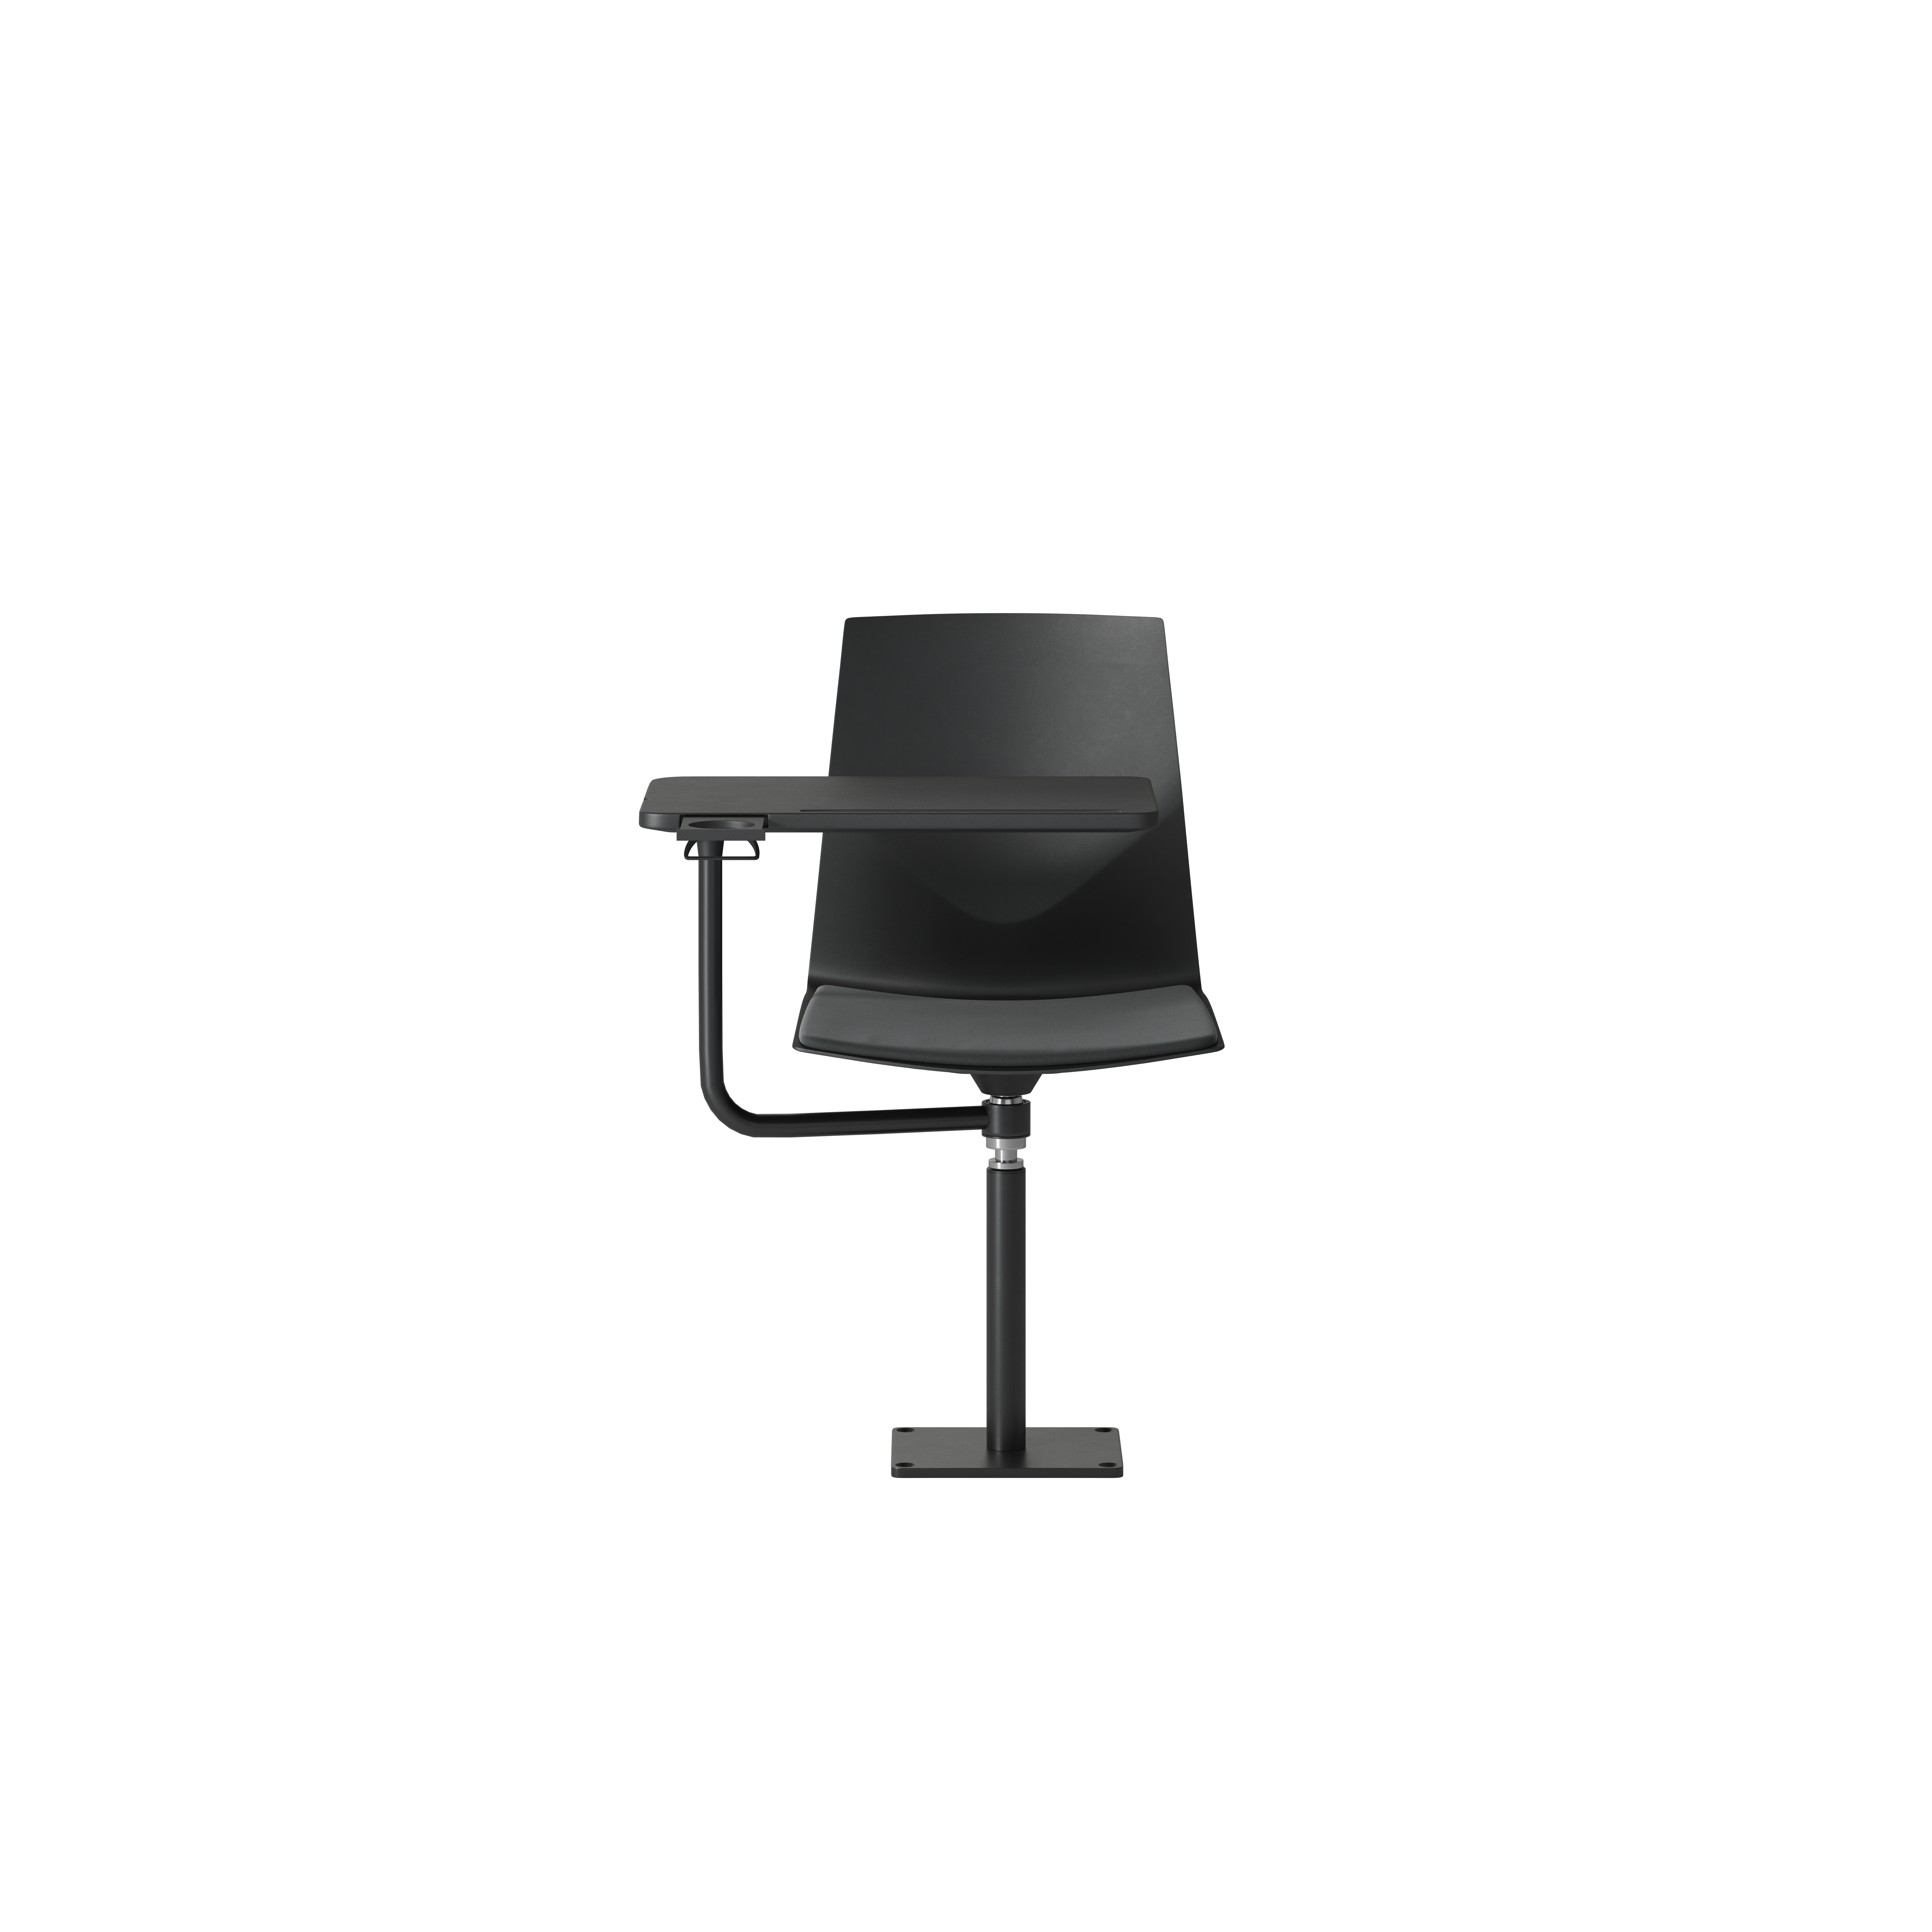 OCEE_FOUR - Chairs - FourCast2 Audi - Plastic shell - Seat Pad - Innotab - Swivel Frame - Packshot Image 6